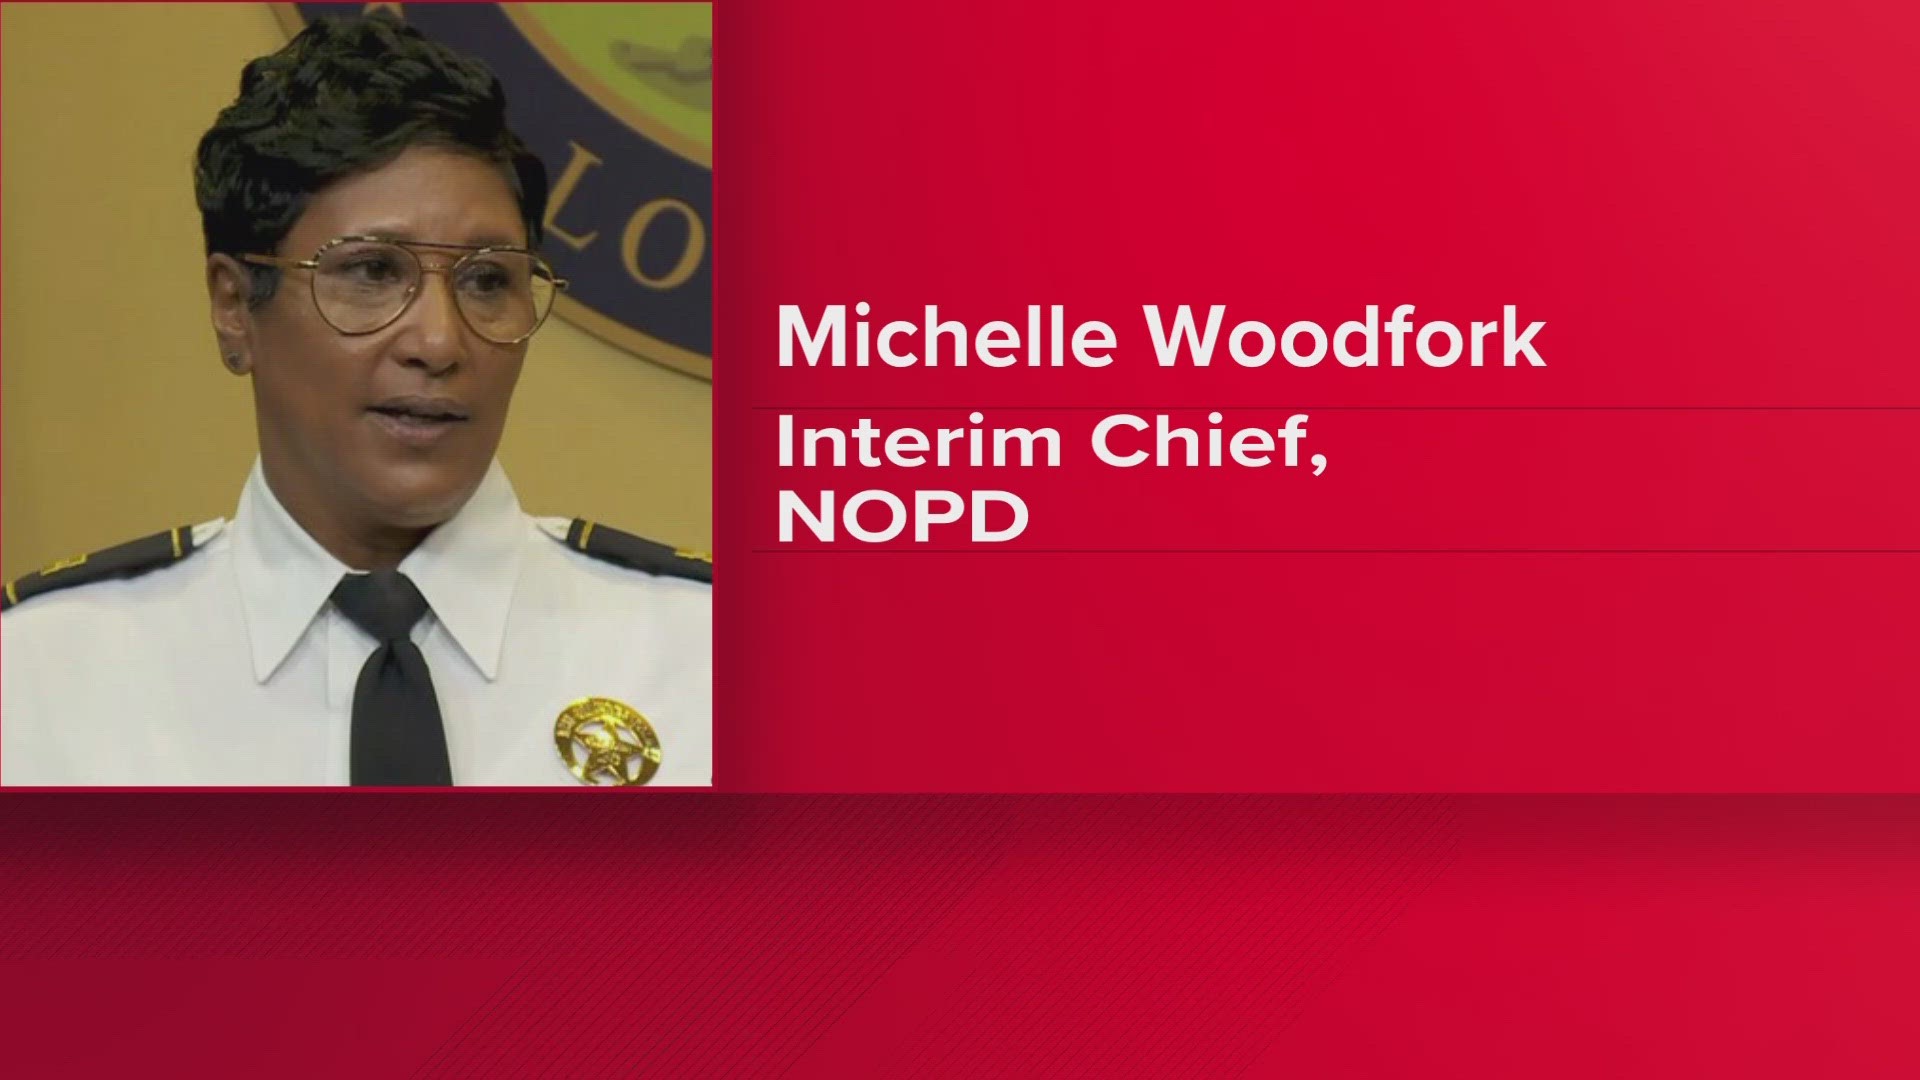 Interim Chief Michelle Woodfork, who has led the department since late December, is one of the semi-finalists. The other five are from out of town.